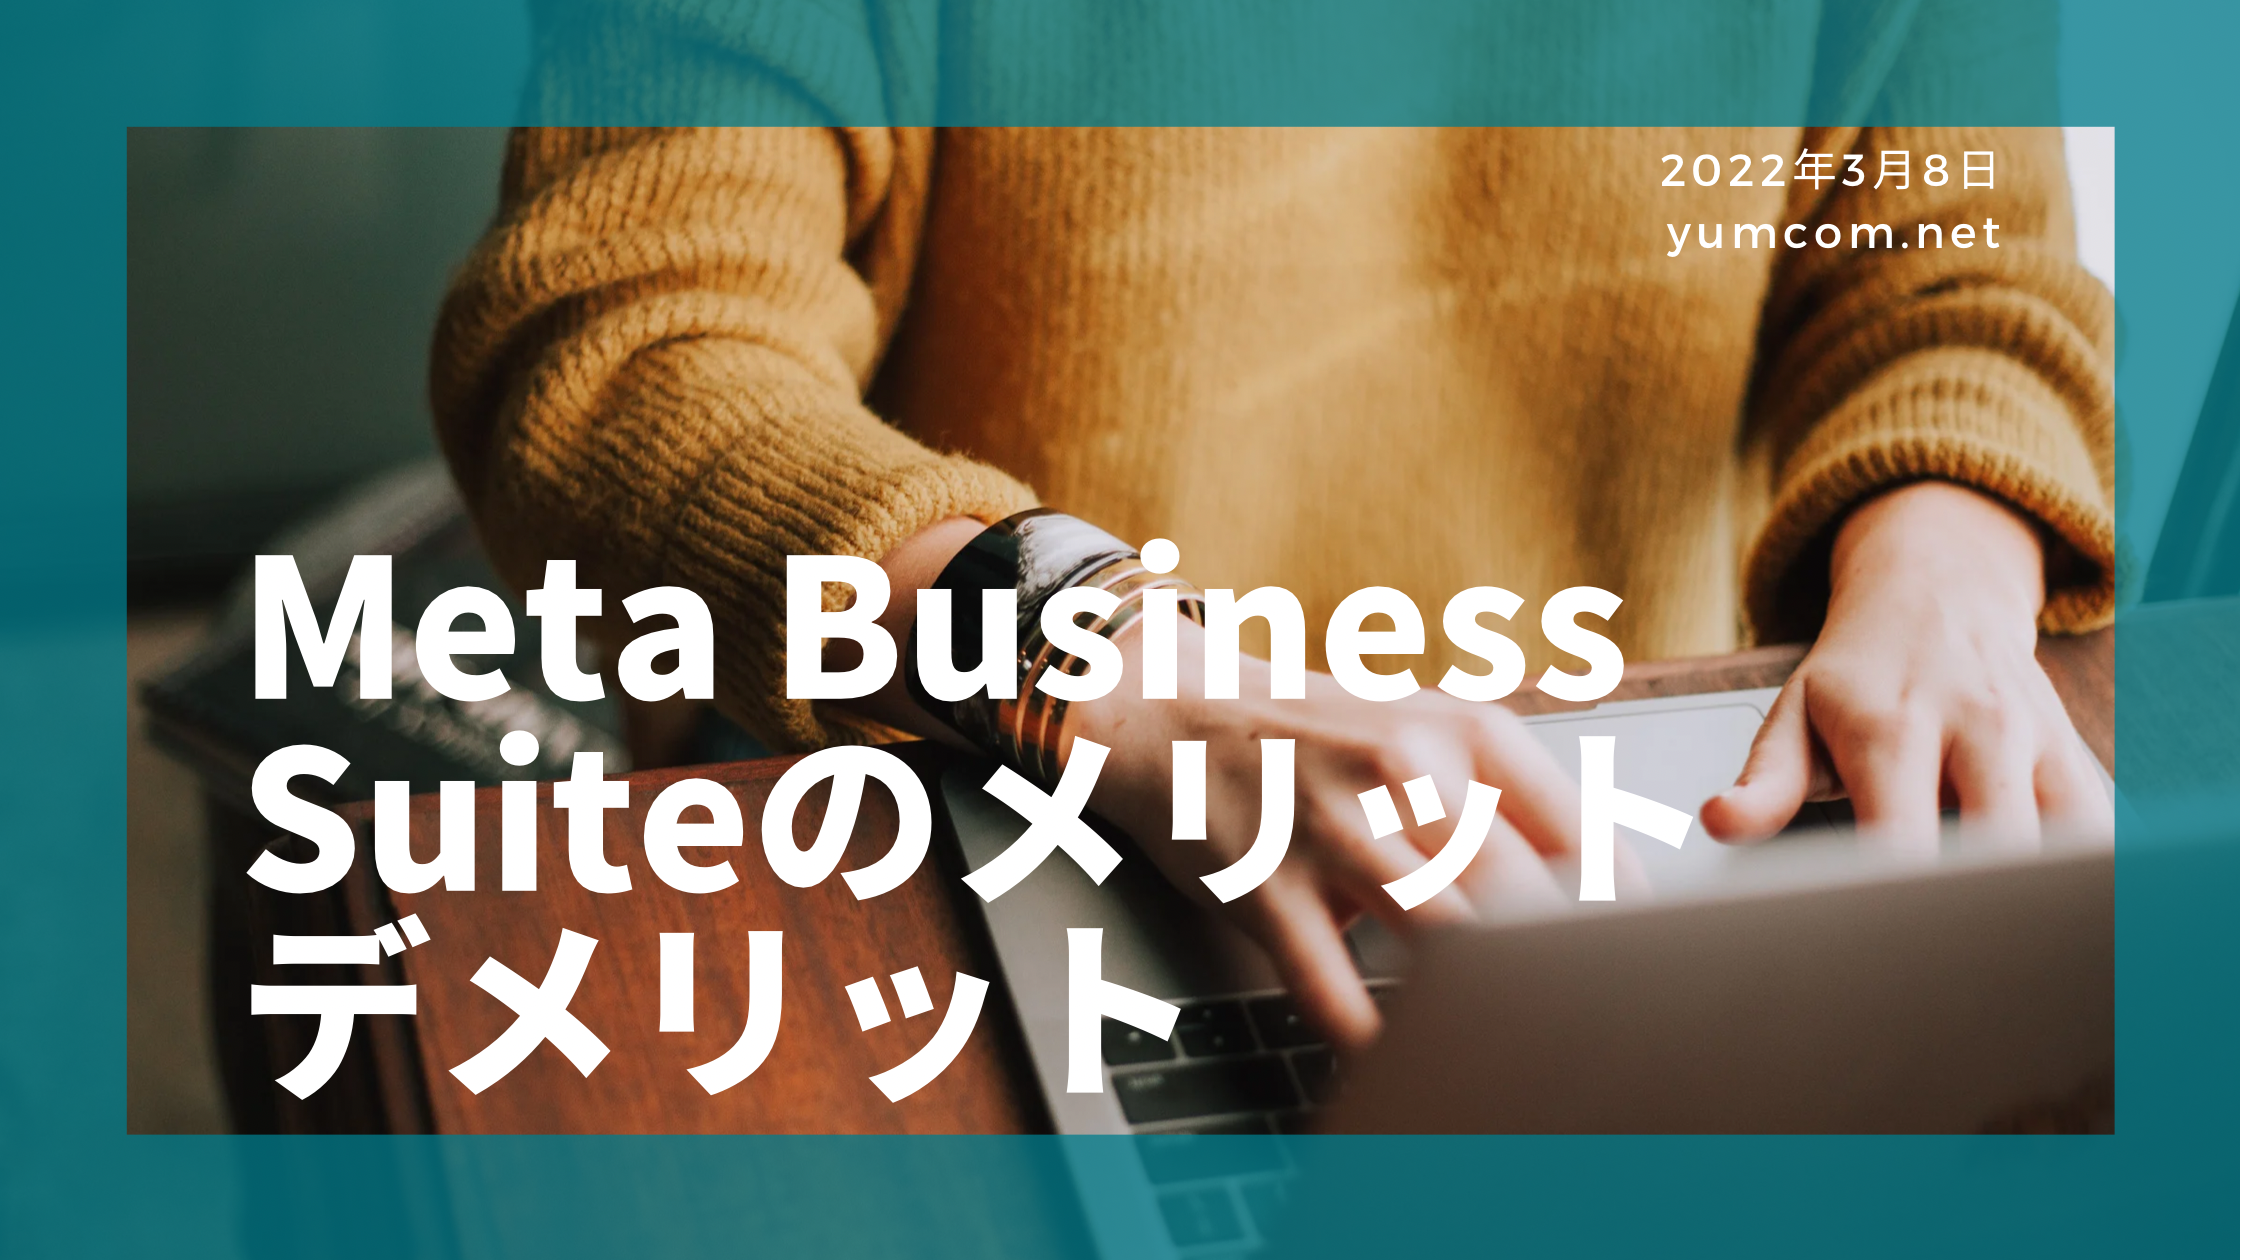 Meta Business Suiteのメリットデメリット